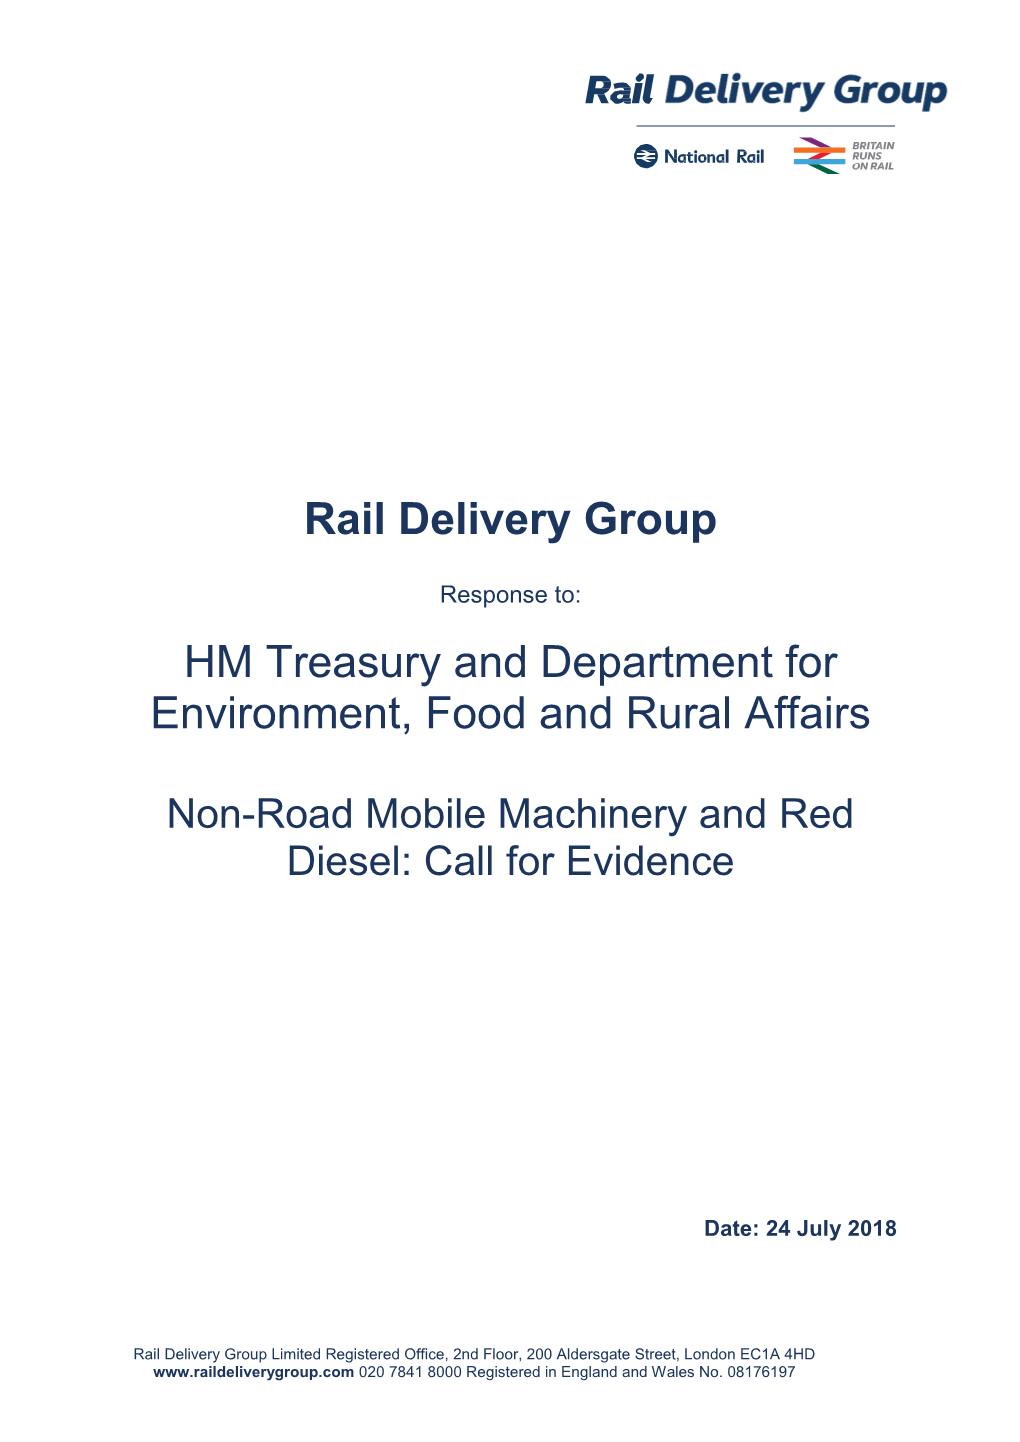 HM Treasury and Department for Environment, Food and Rural Affairs